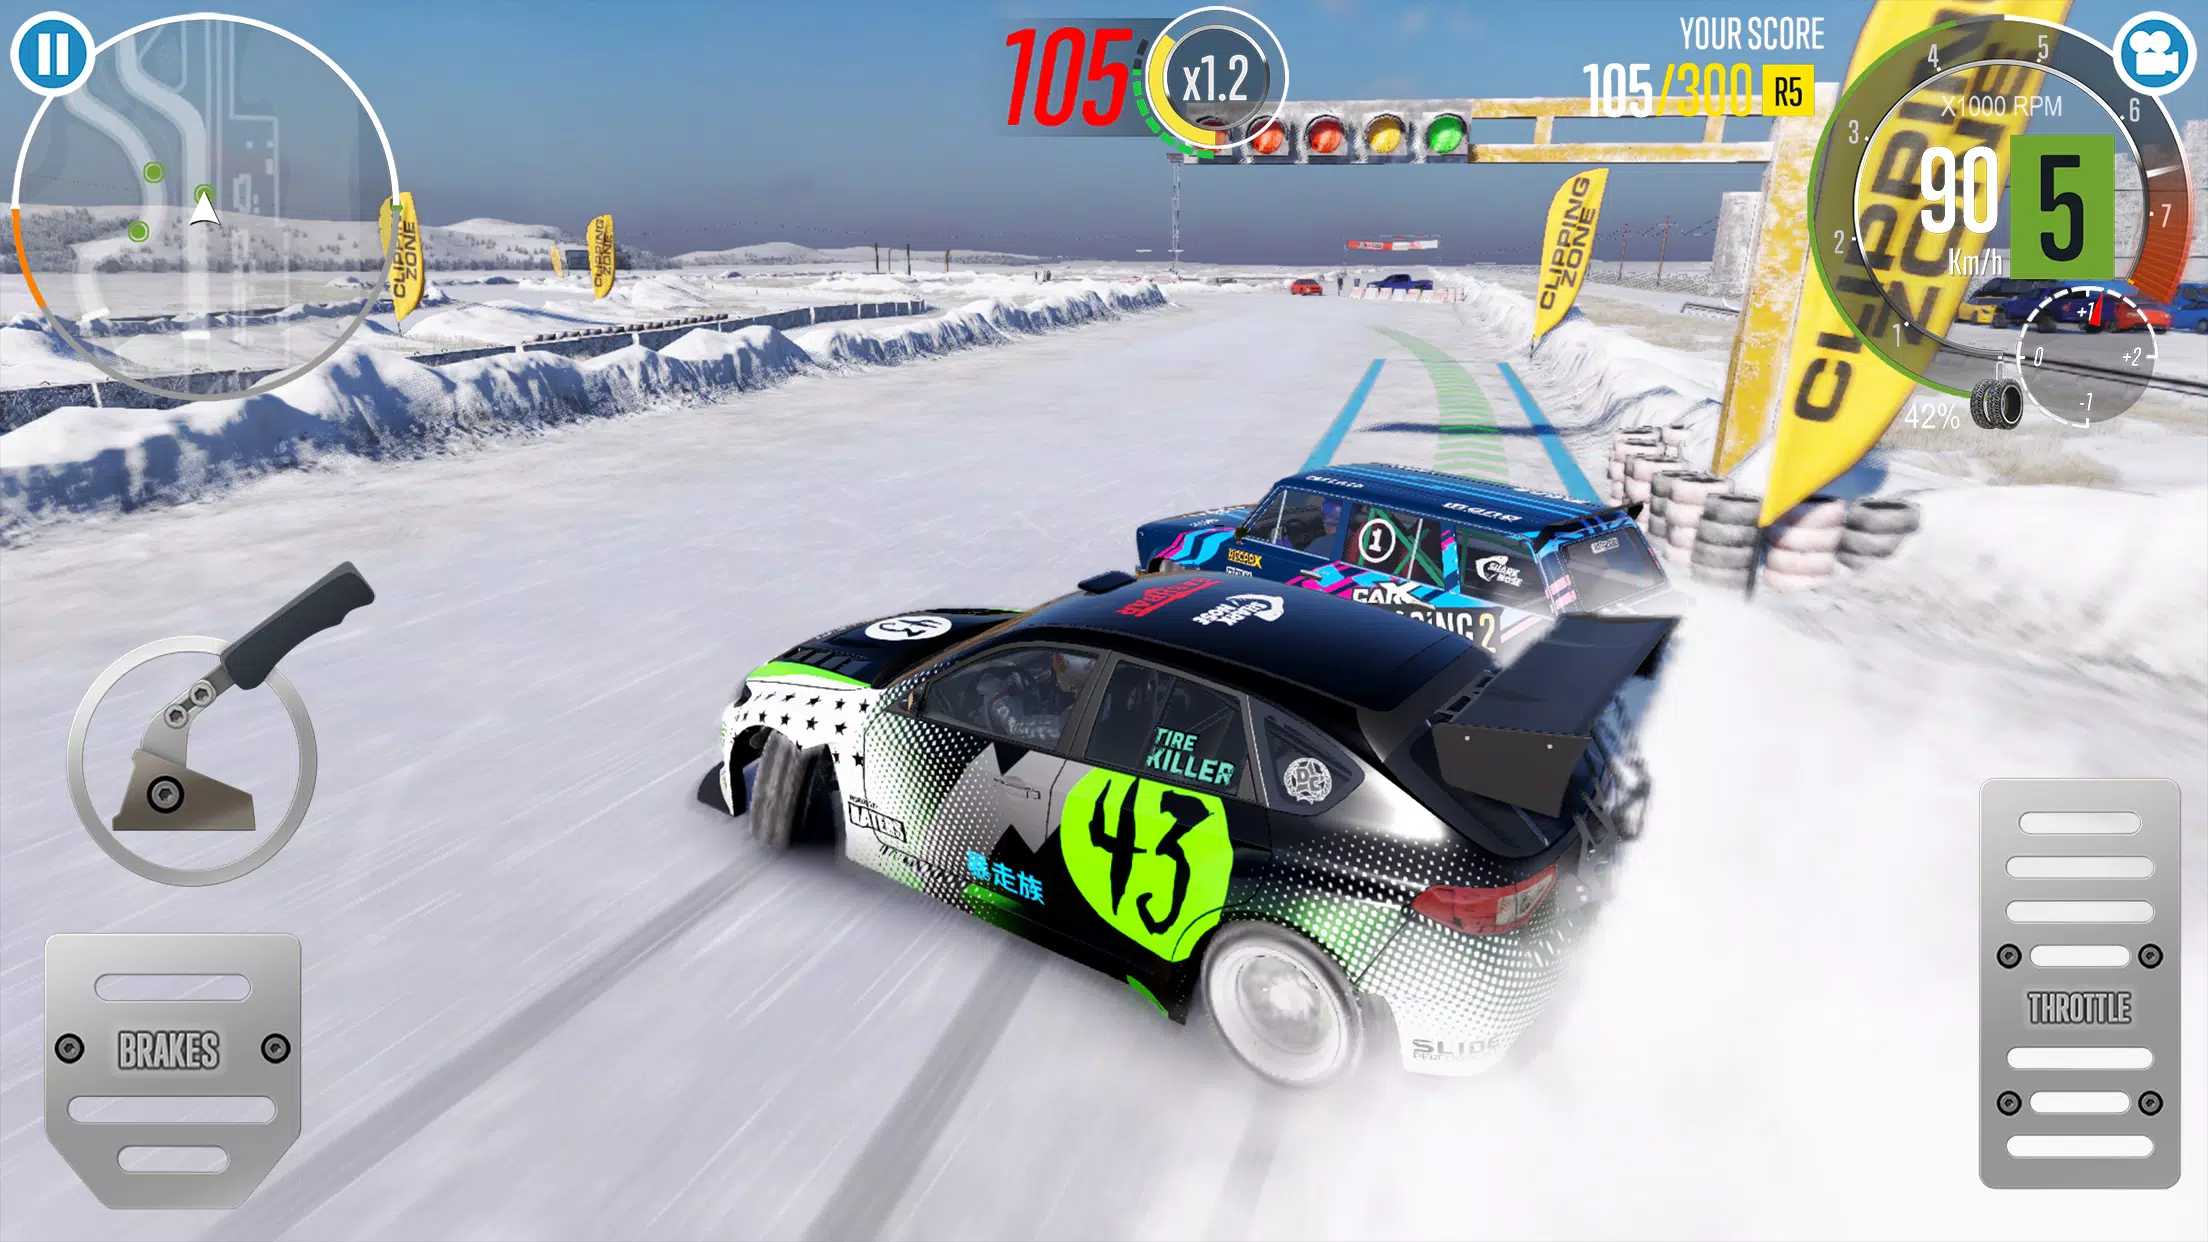 CarX Drift Racing 2 APK for Android Download